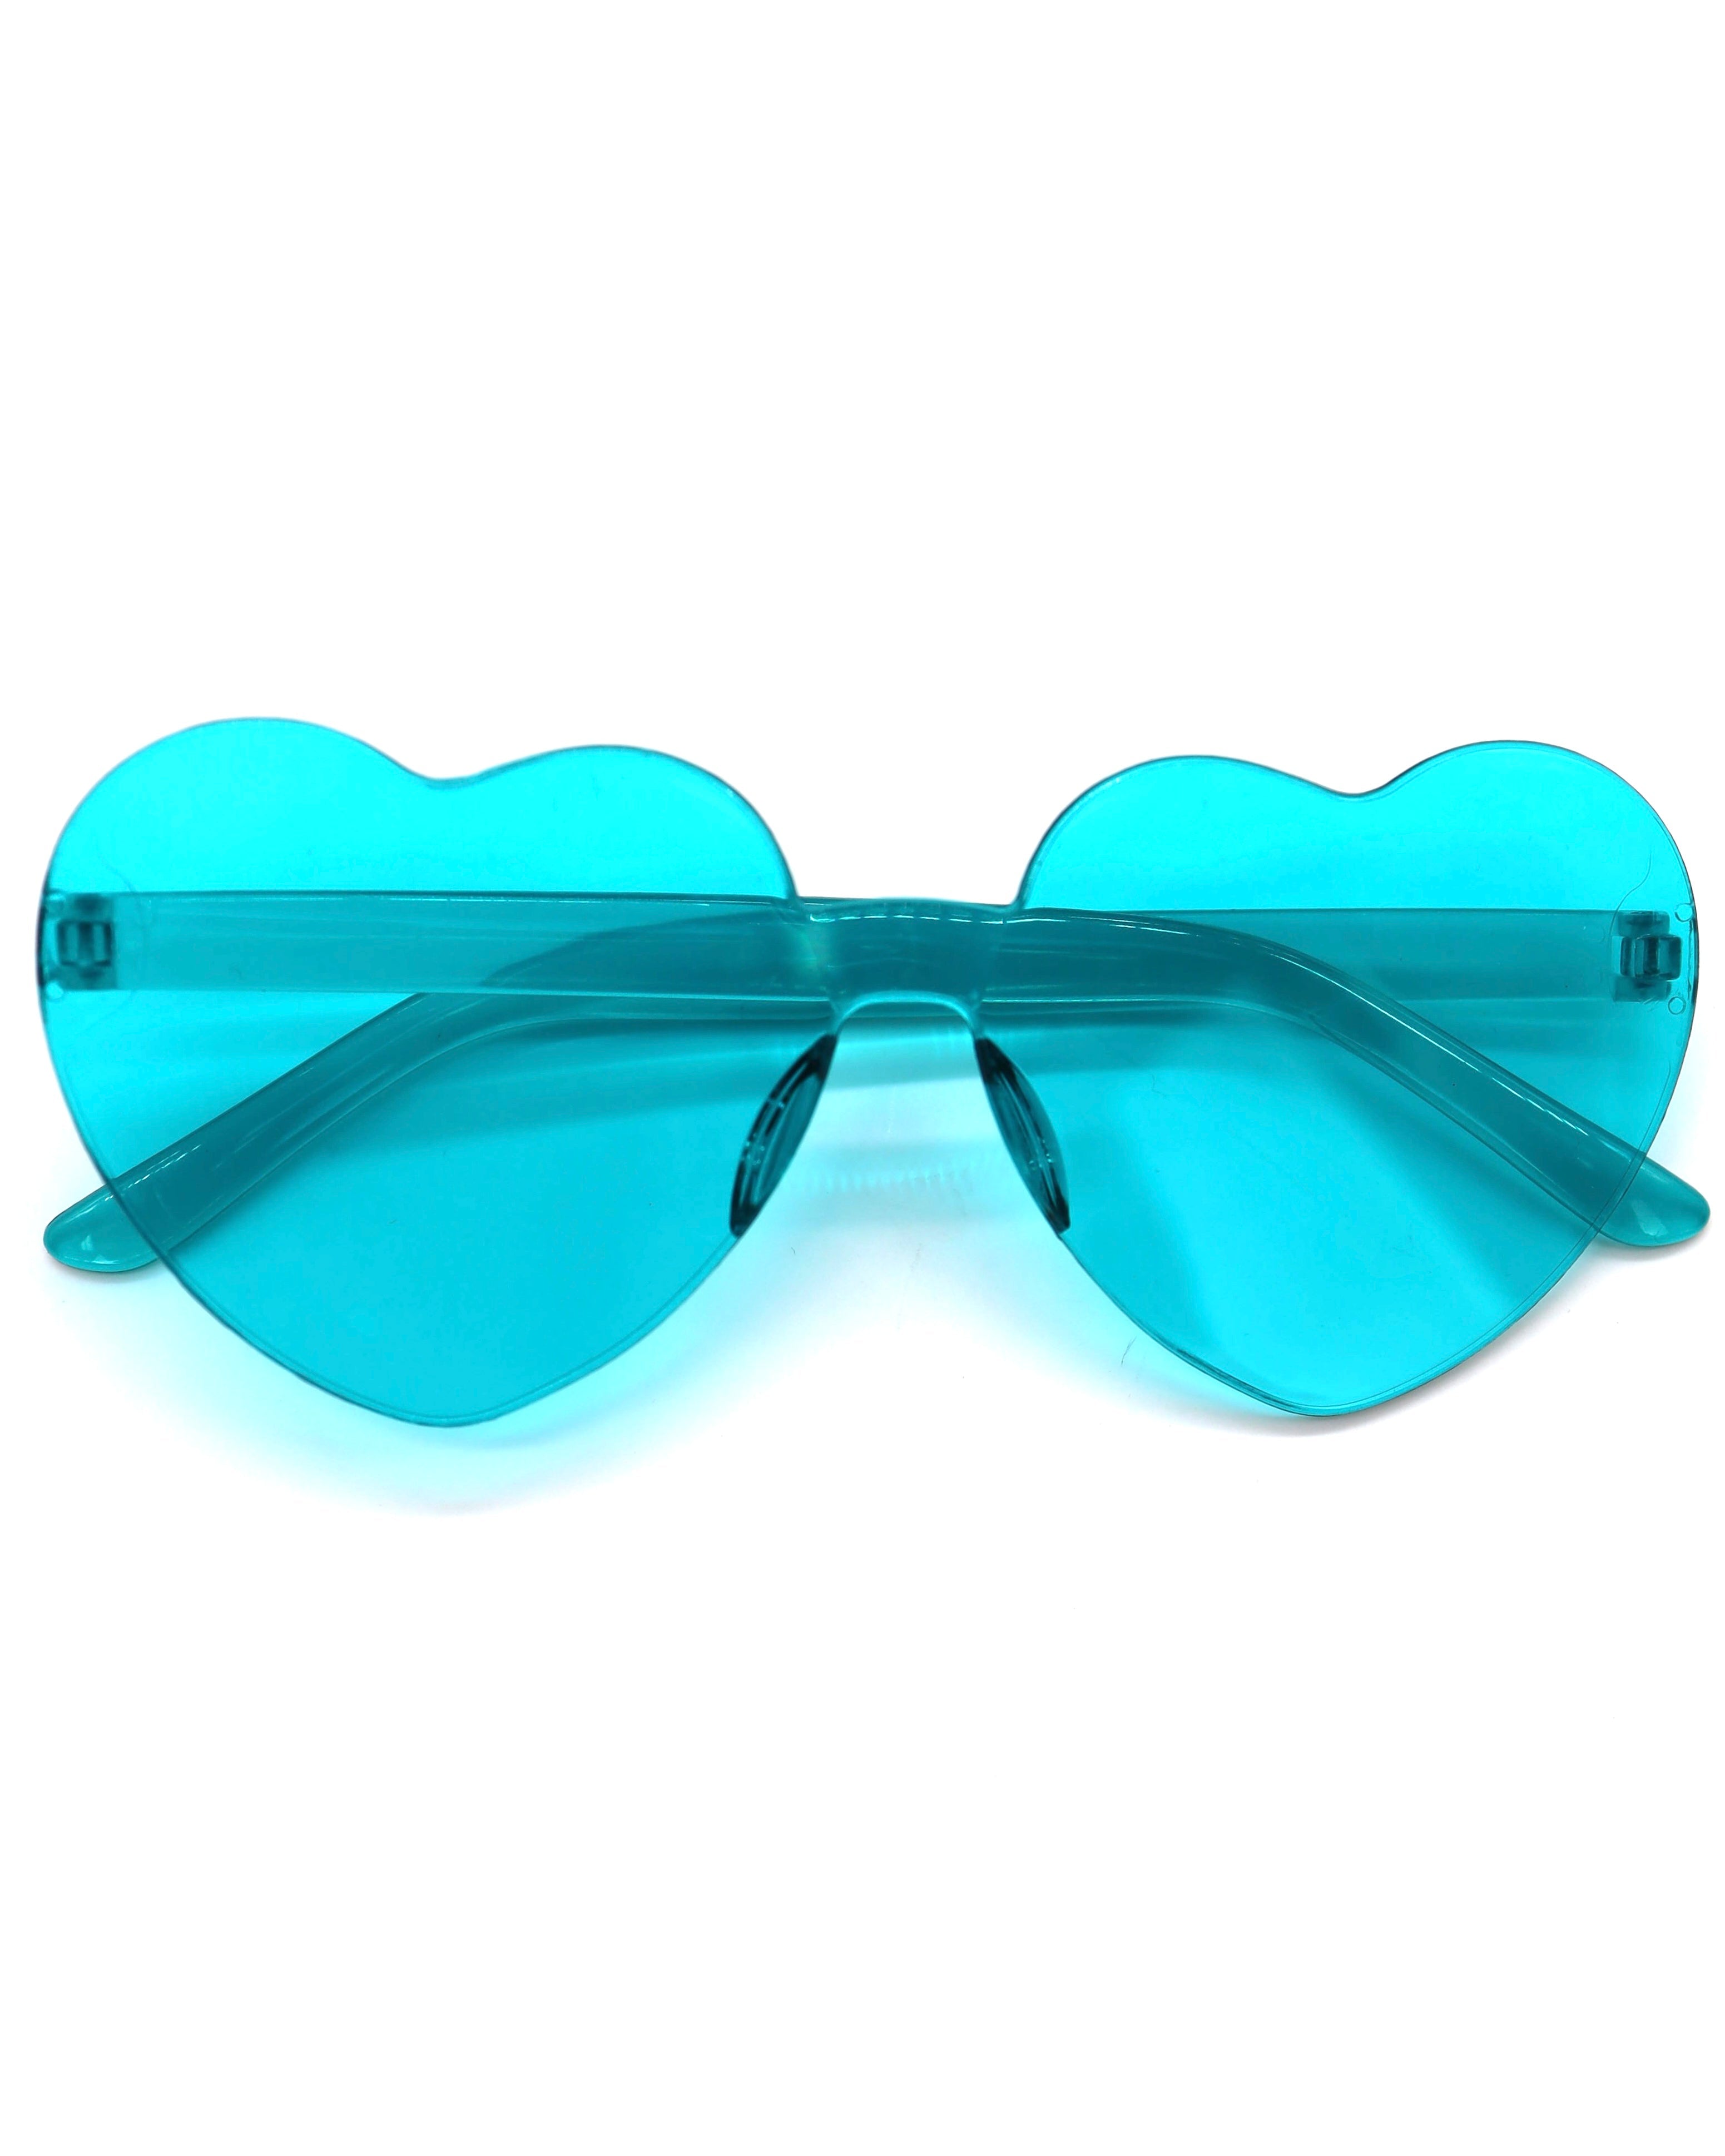 Teal Heart Sunglasses, Heart Sunglasses, - One Stop Rave